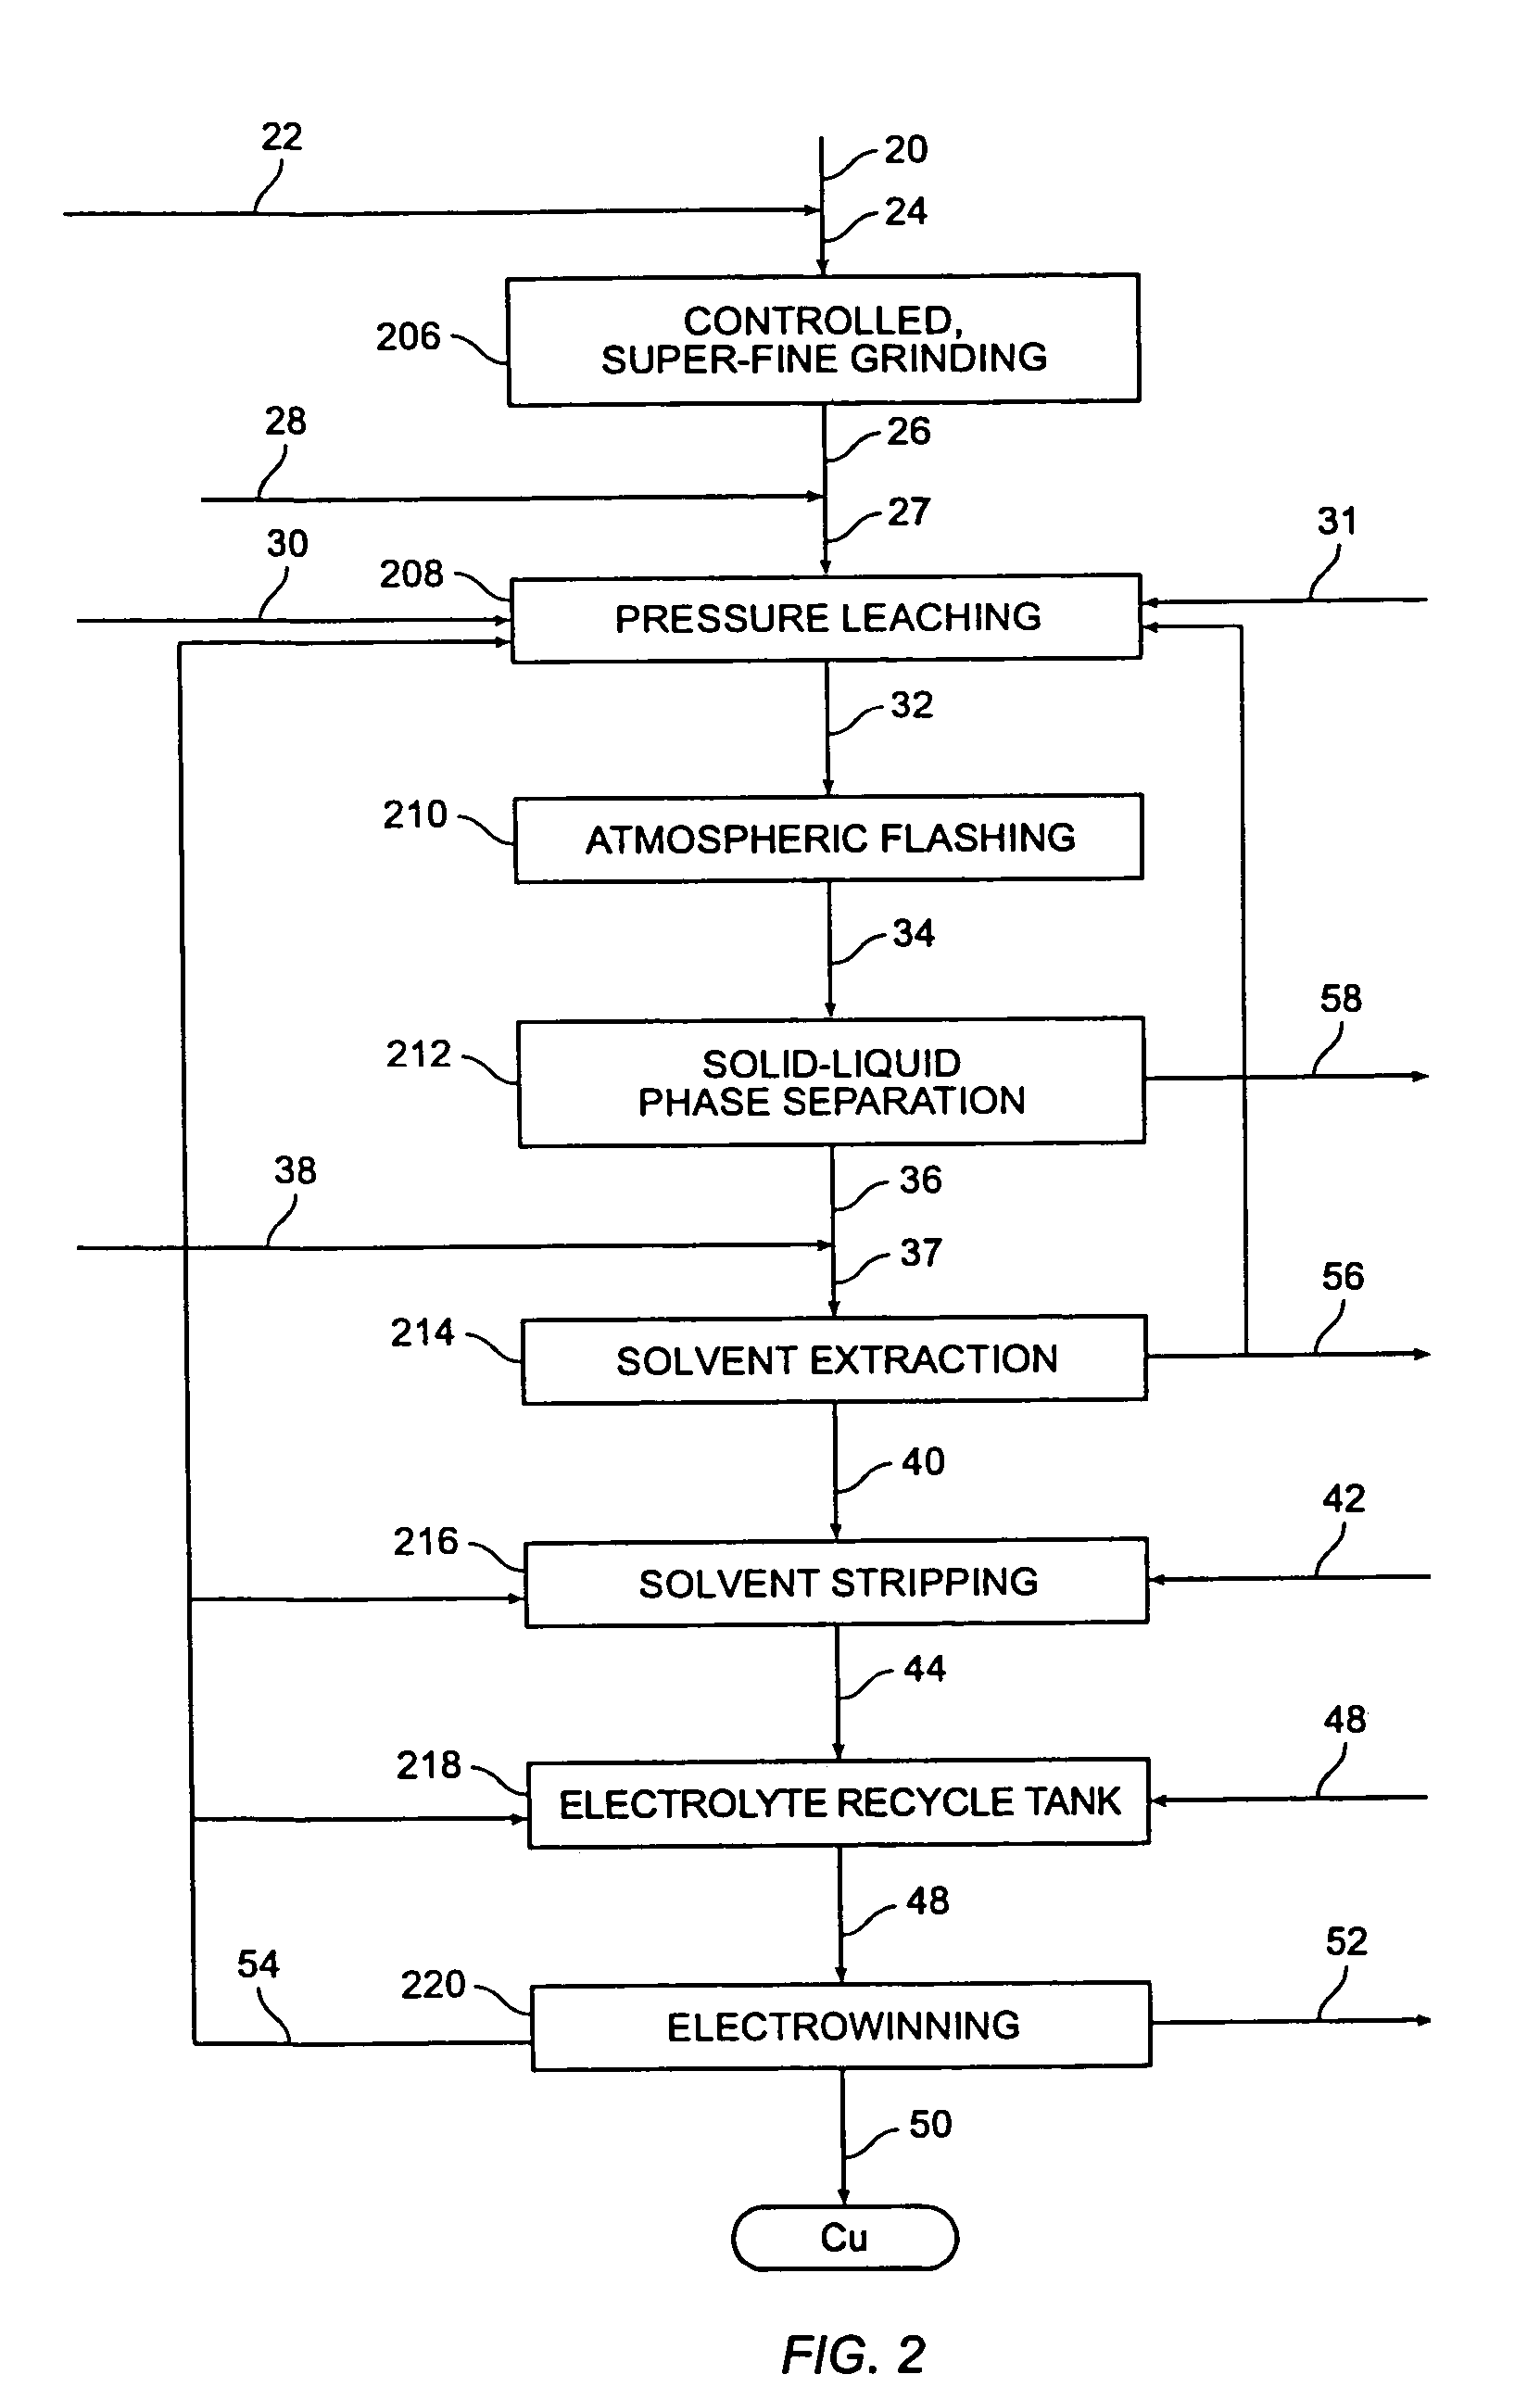 Method for recovery of metals from metal-containing materials using medium temperature pressure leaching